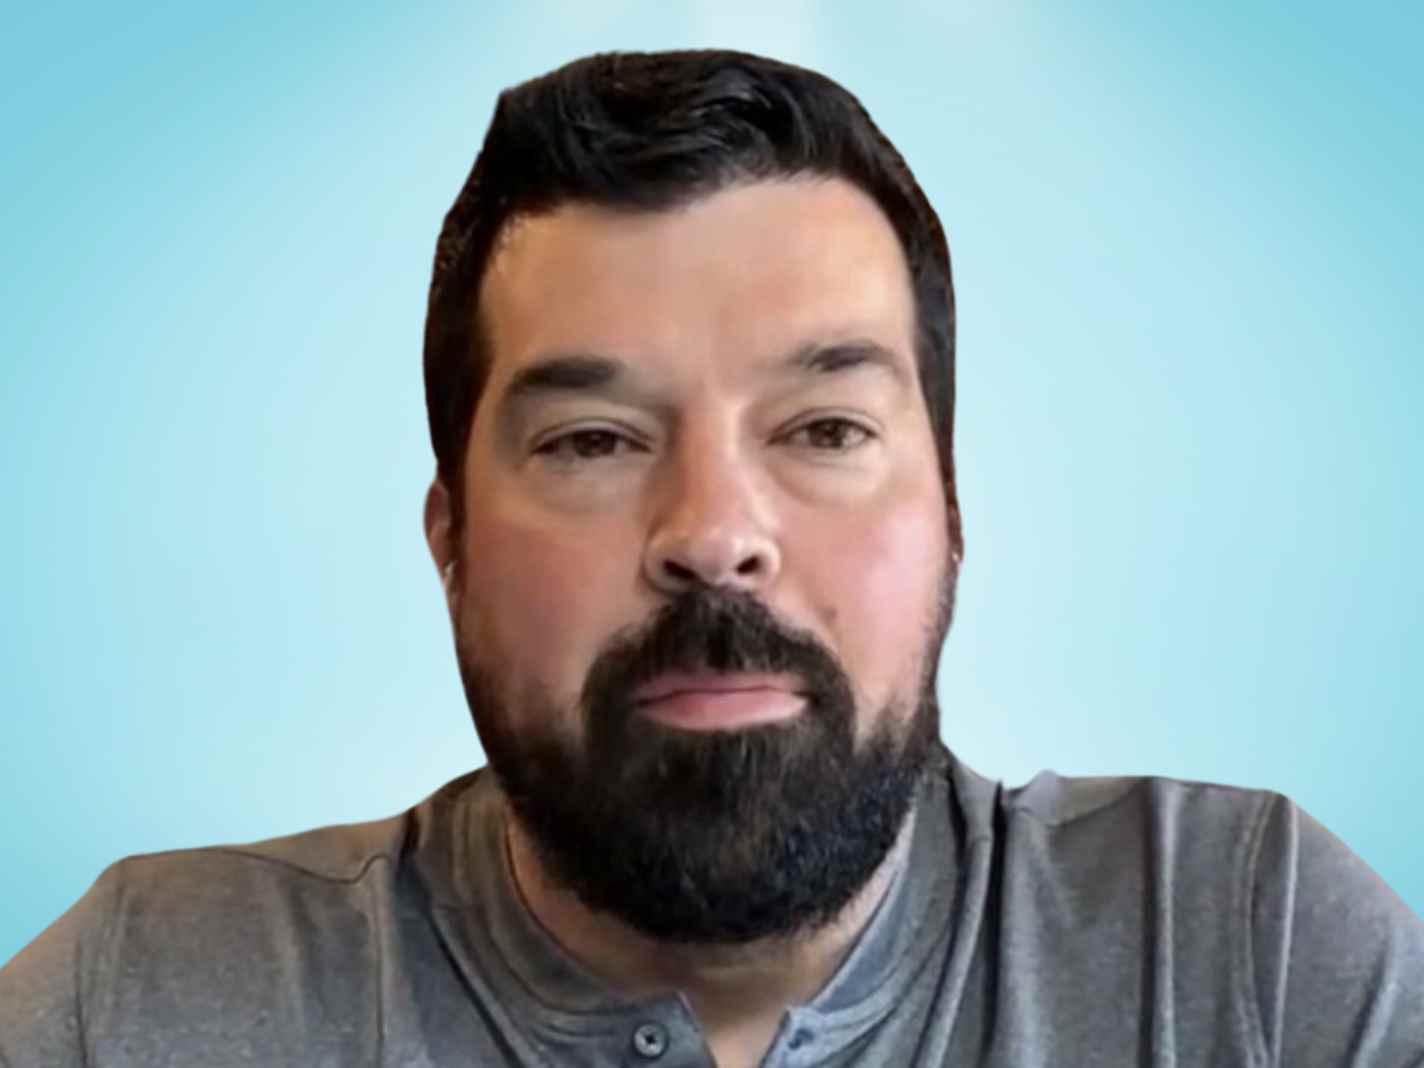 Fans Think Ryan Day is Overdoing the Beard Dye